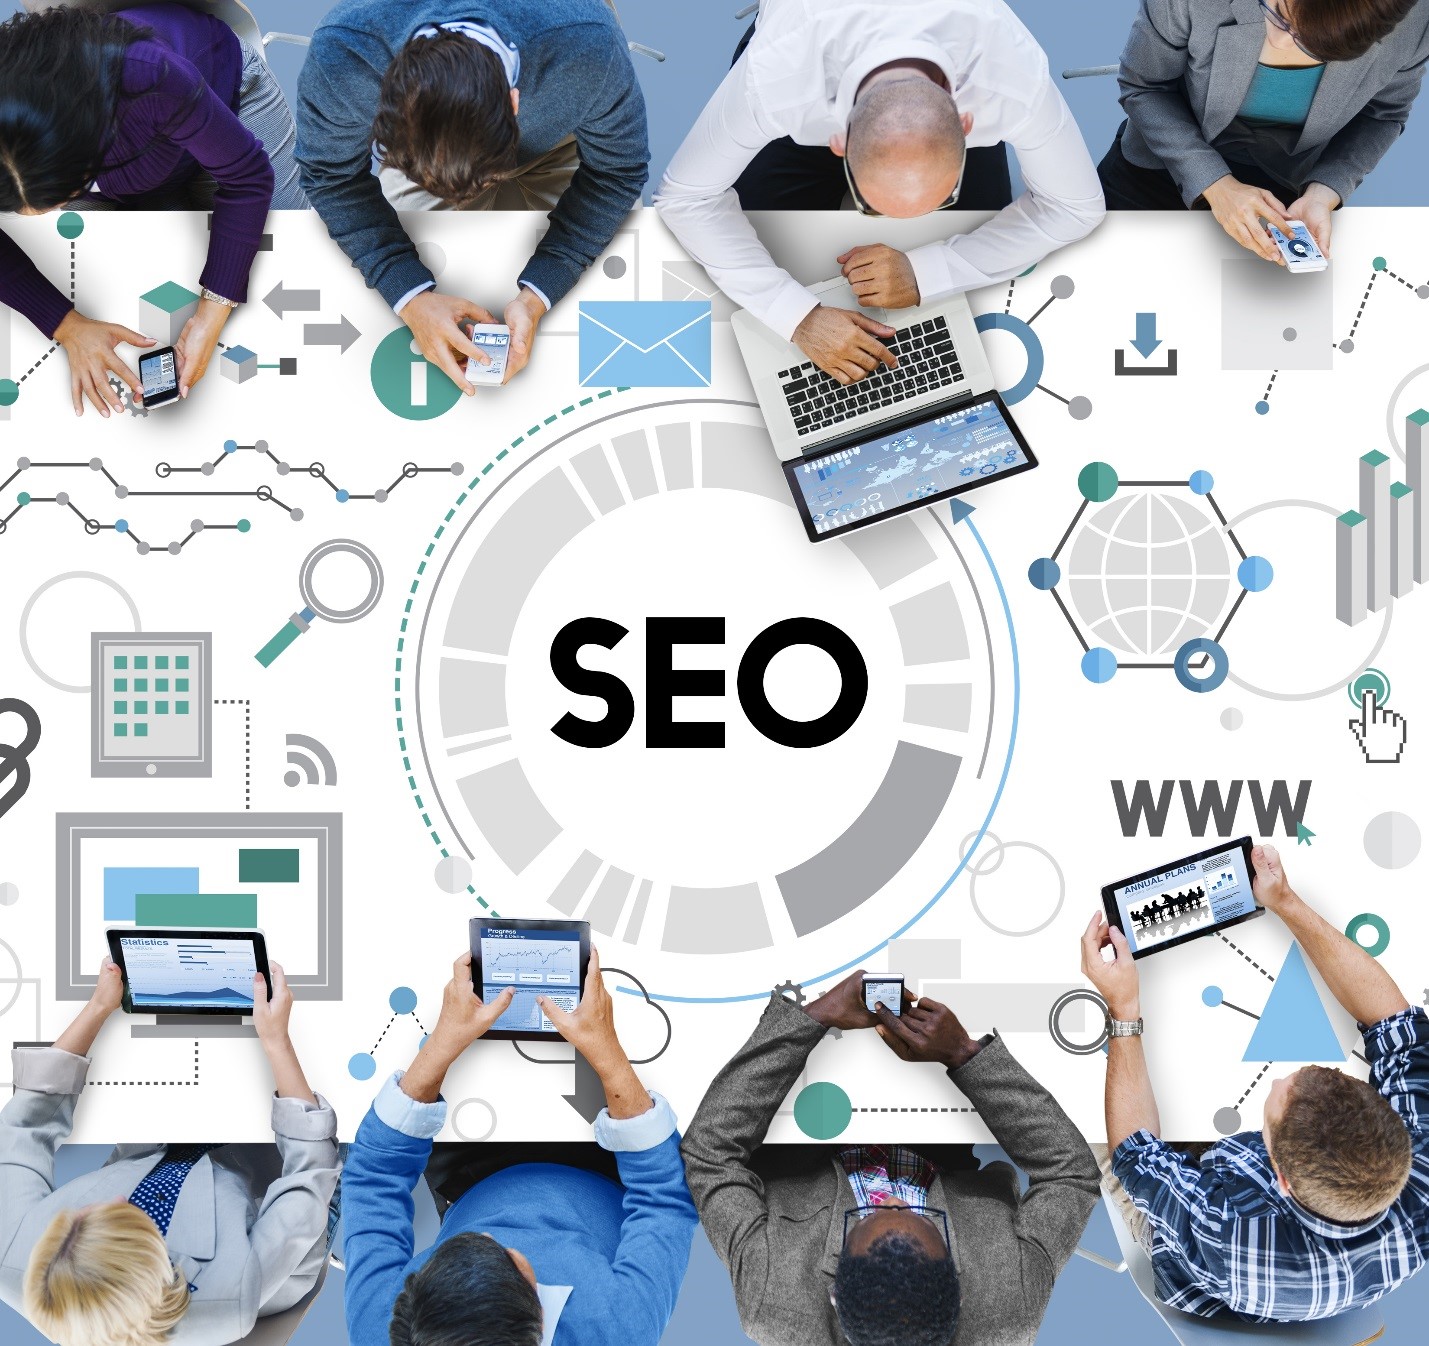 Strengthen Your SEO As Part Of Your Marketplace Marketing Plan